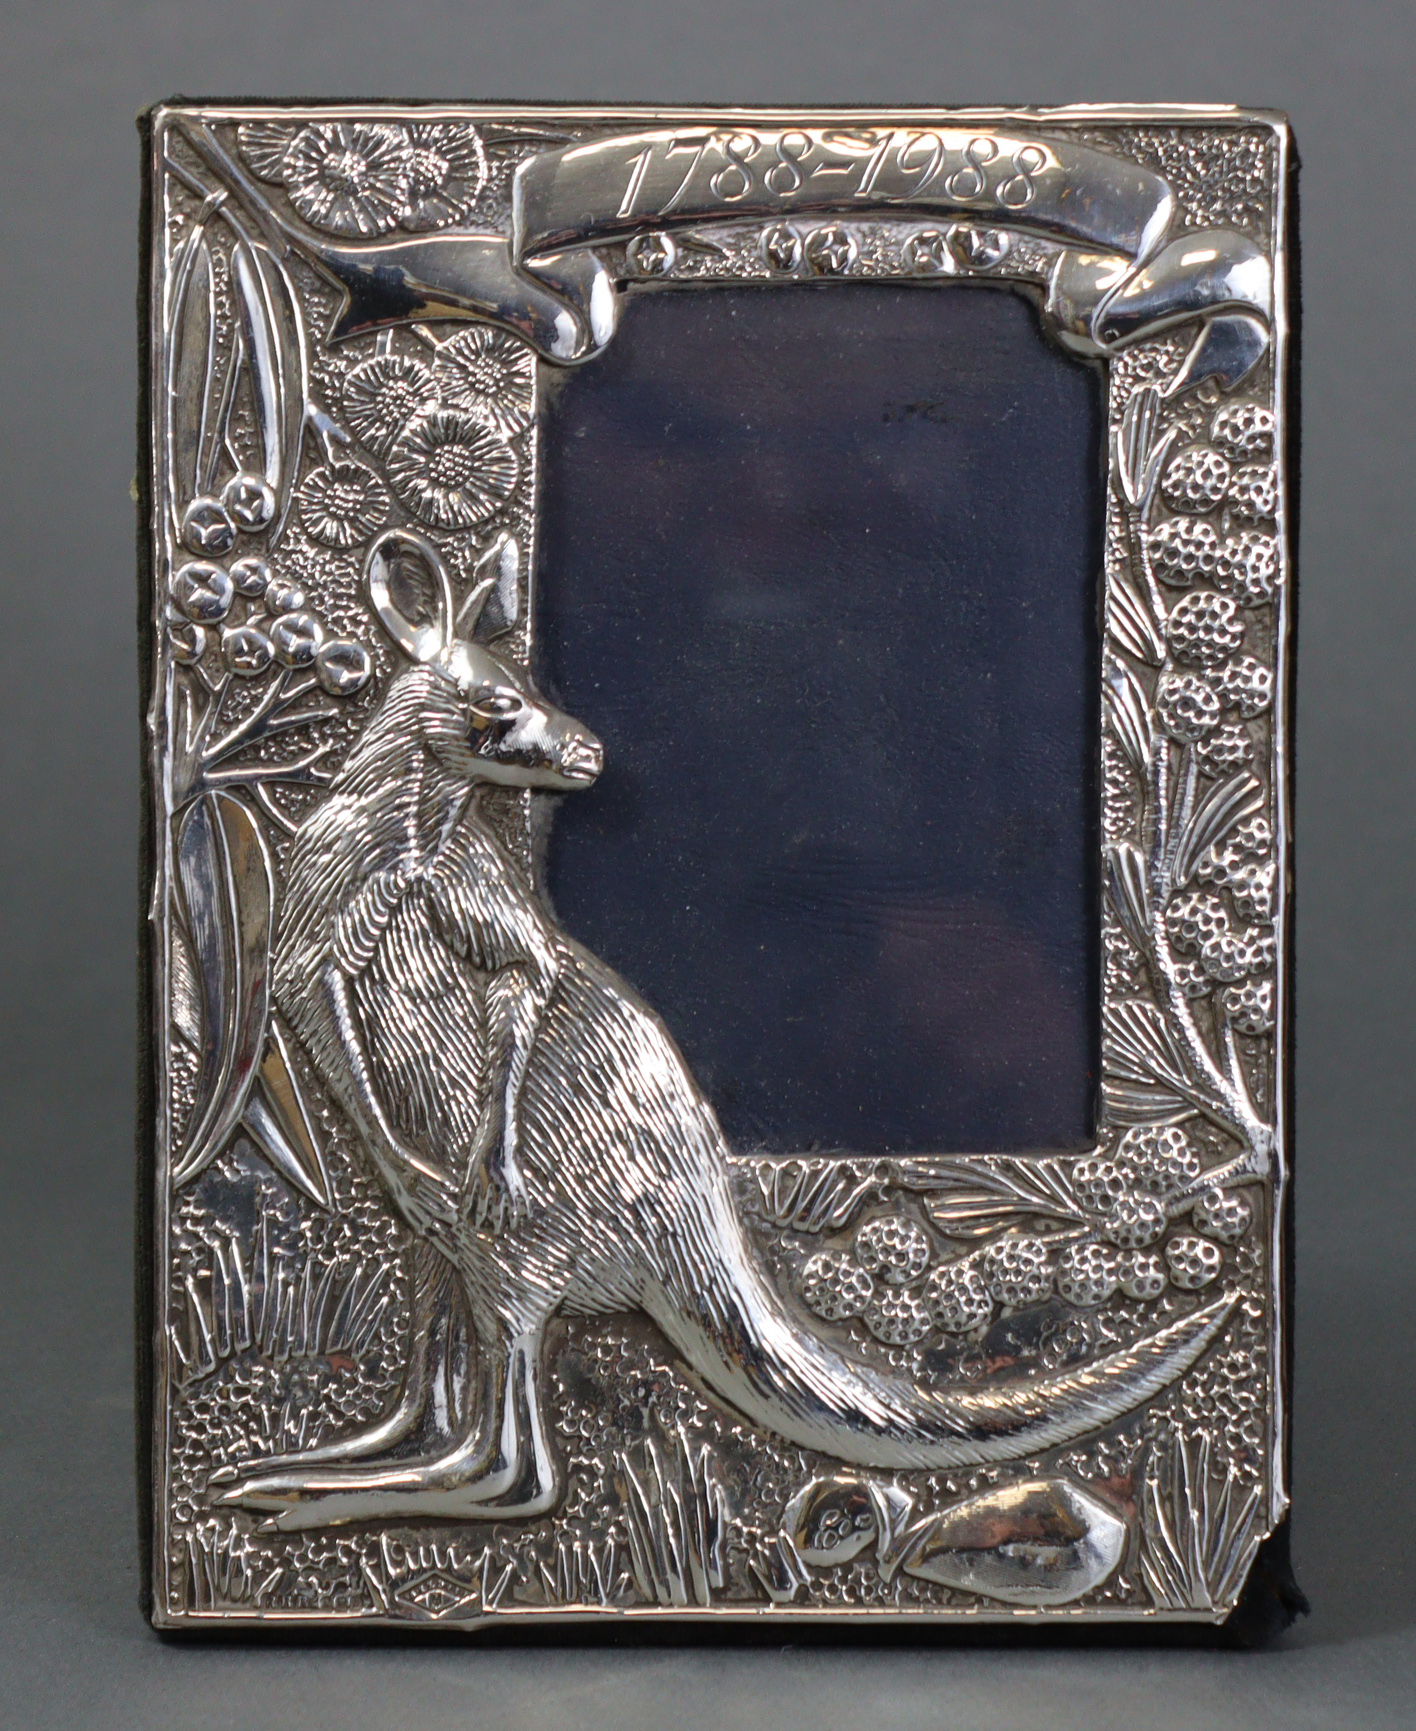 A rectangular commemorative silver photograph frame with embossed decoration depicting a kangaroo